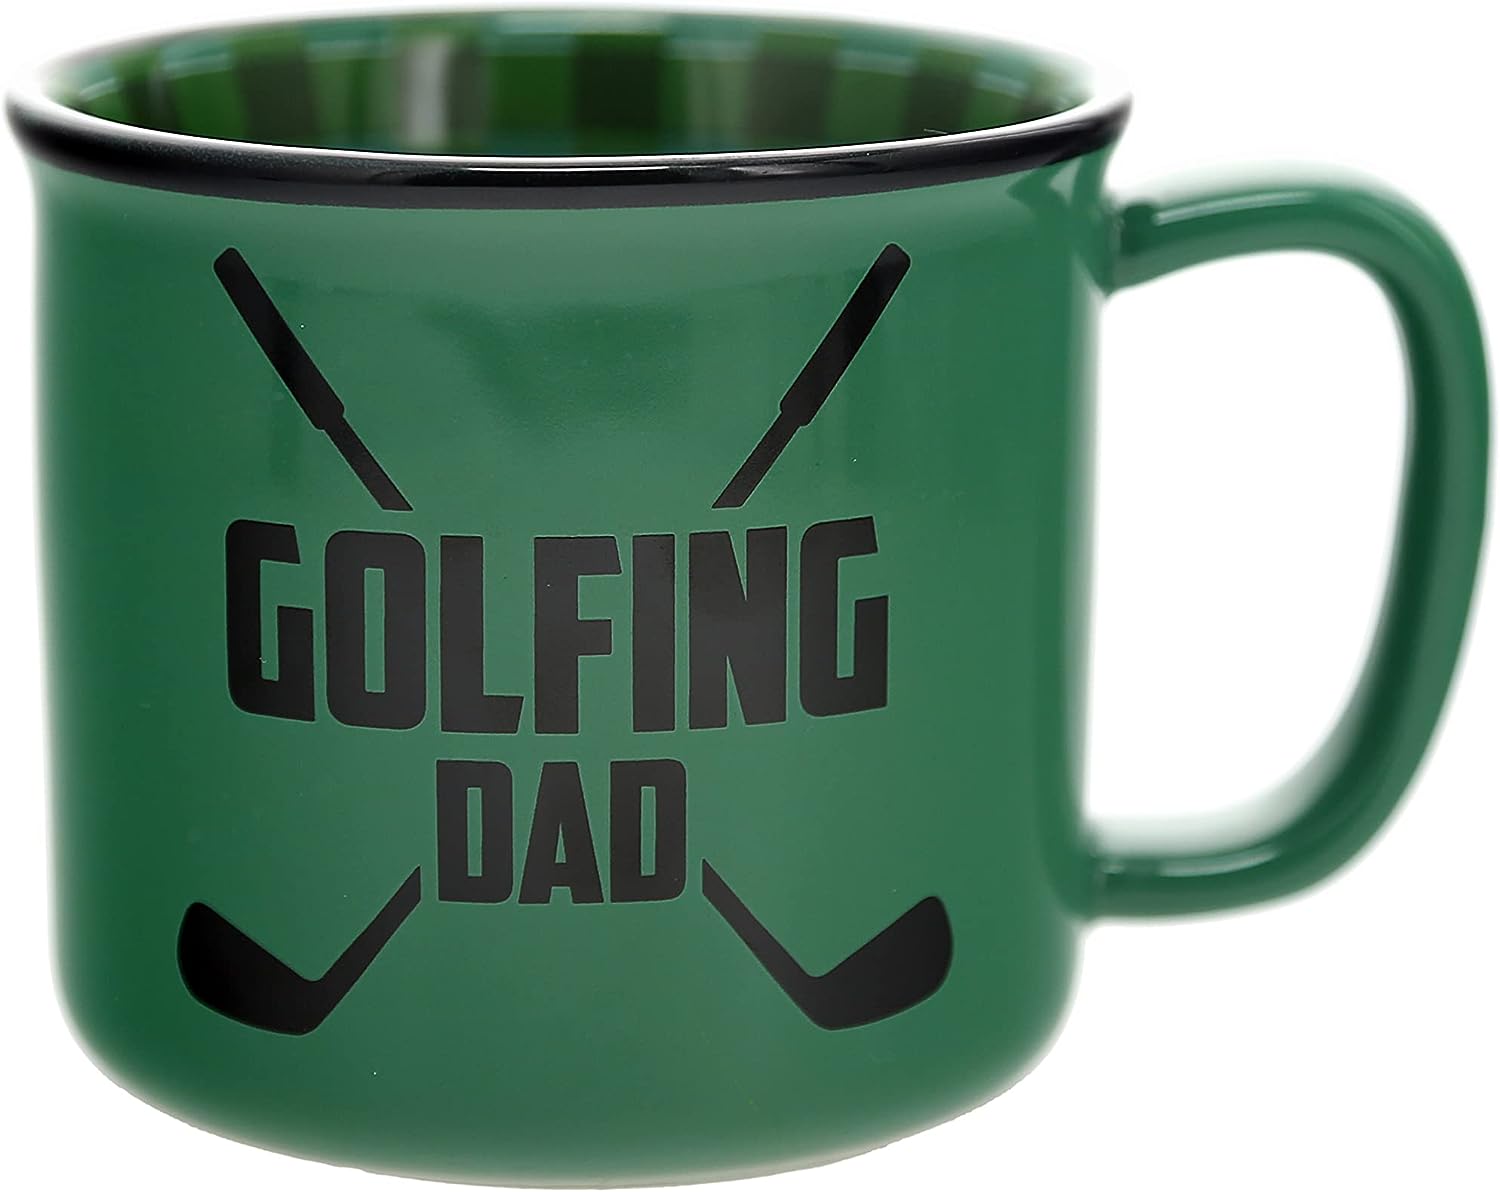 Pavilion - Golfing Dad - 18 oz Coffee Mug Cup For Outdoorsy Sport Golfing Men Father's Day Golf Gift